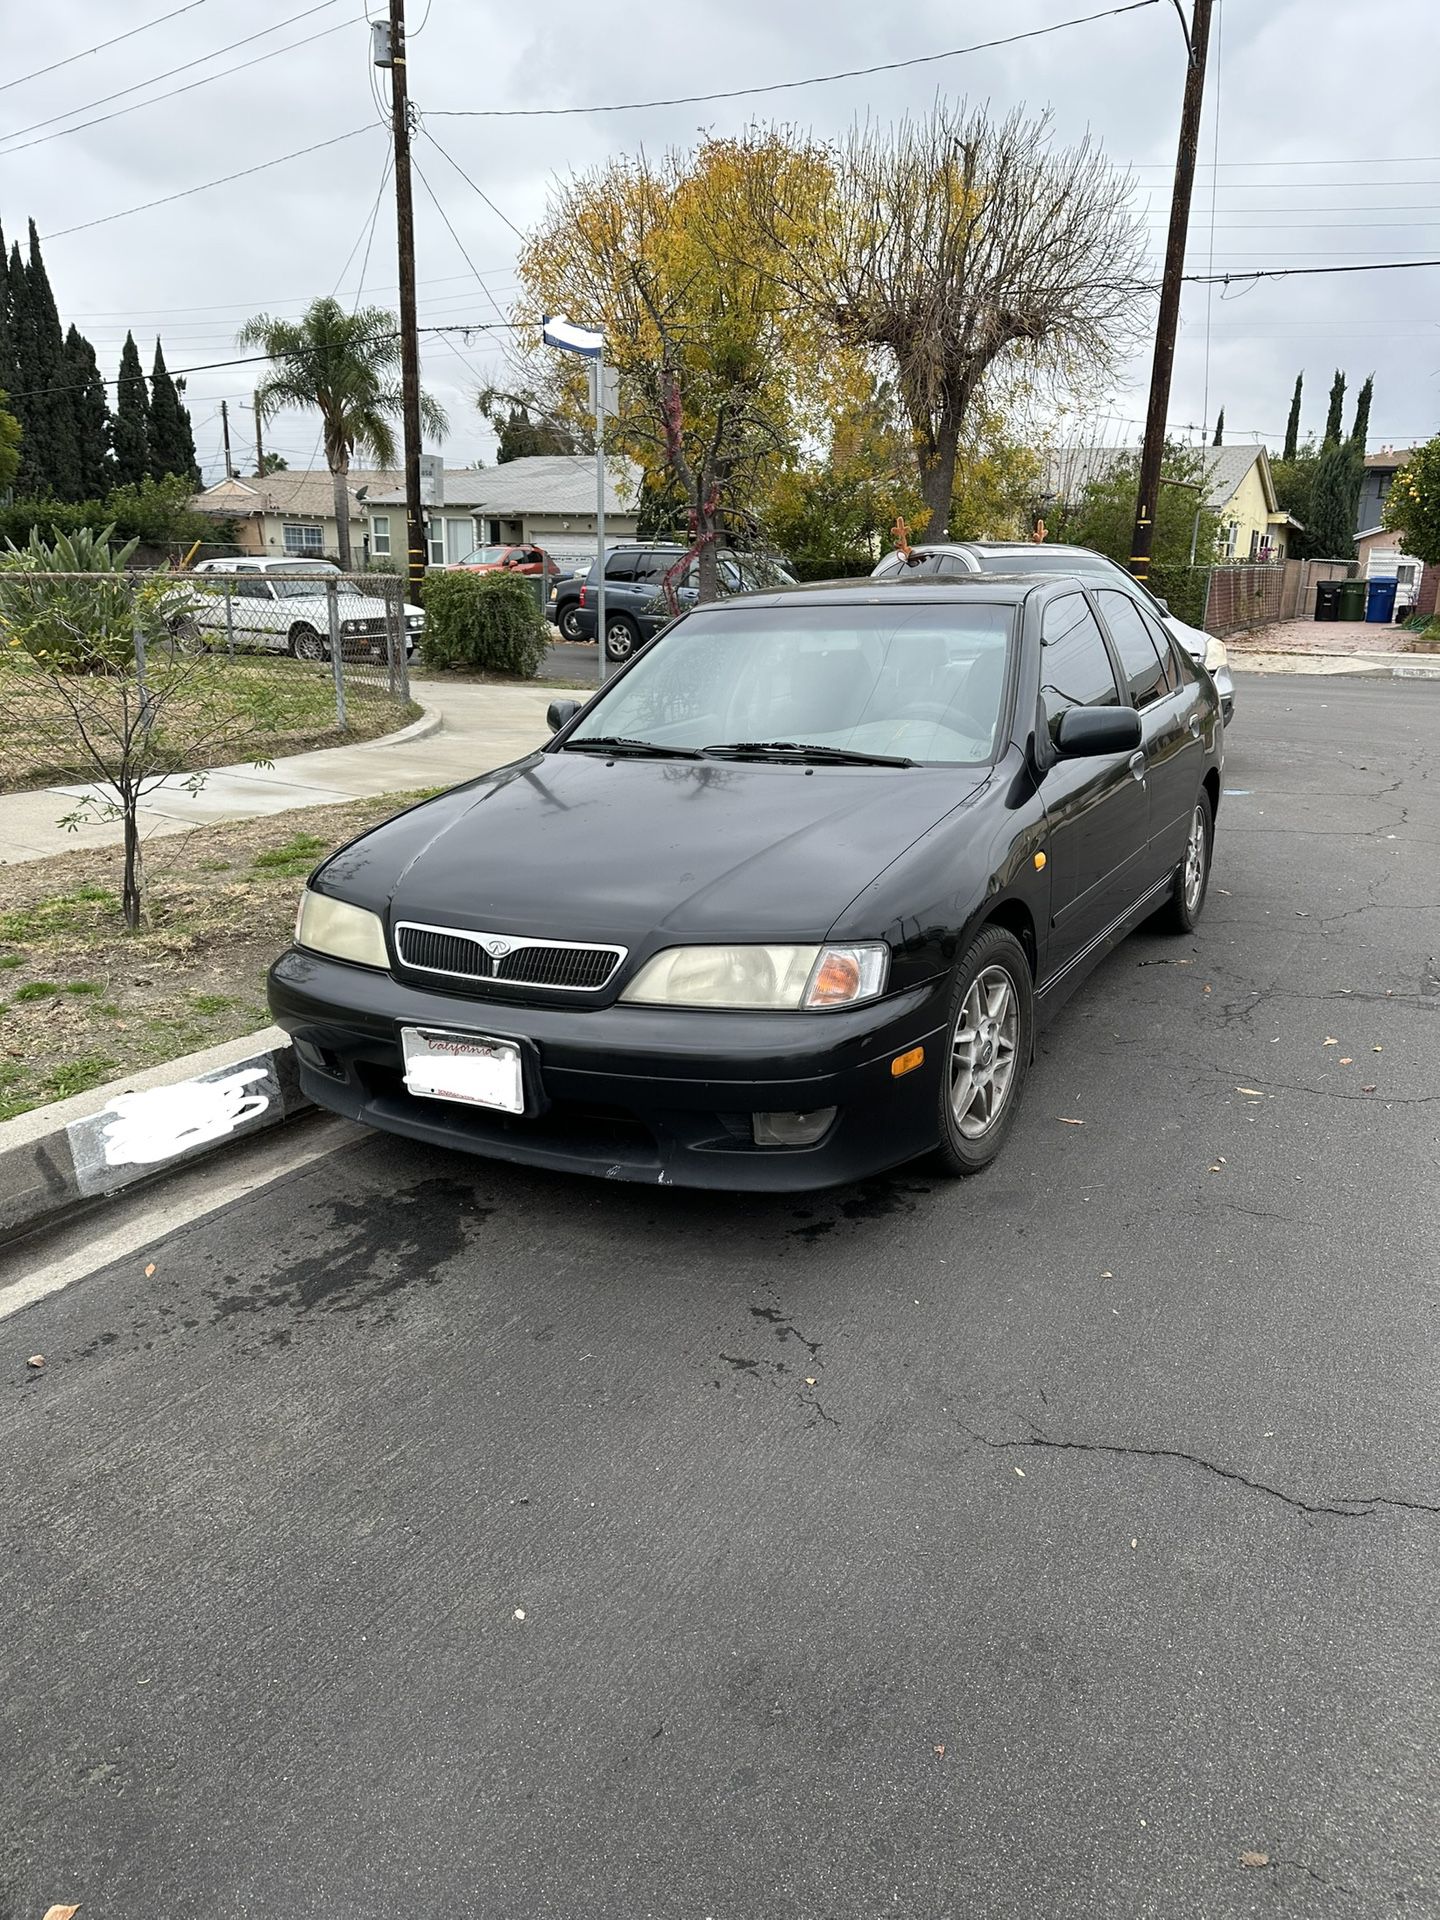 2000 Infiniti G20 for Sale in Los Angeles, CA - OfferUp